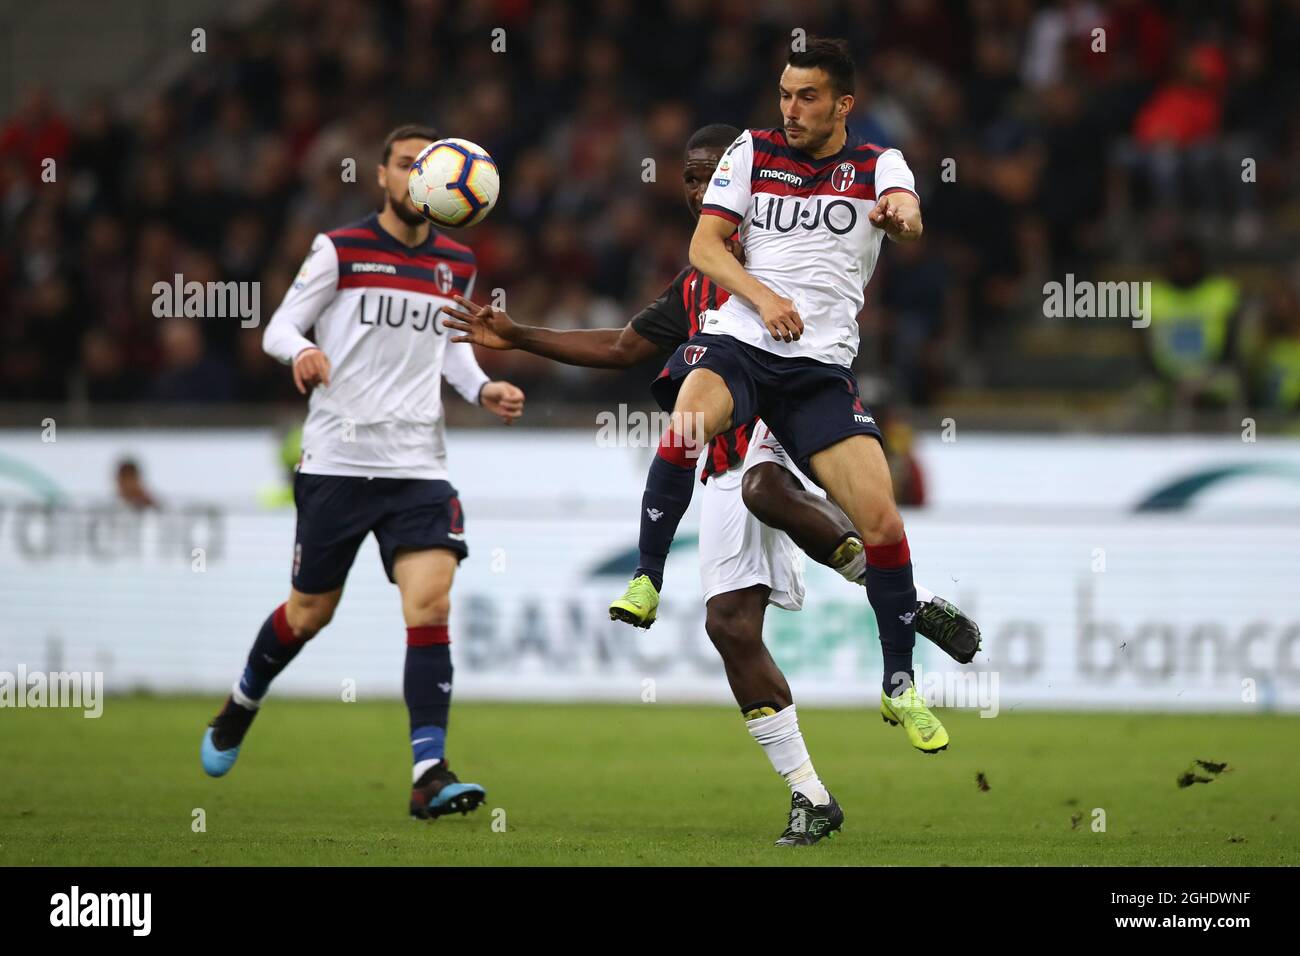 Nicola Sansone of Bologna battles with Cristian Zapata of AC Milan during the Serie A match at Giuseppe Meazza, Milan. Picture date: 6th May 2019. Picture credit should read: Jonathan Moscrop/Sportimage via PA Images Stock Photo